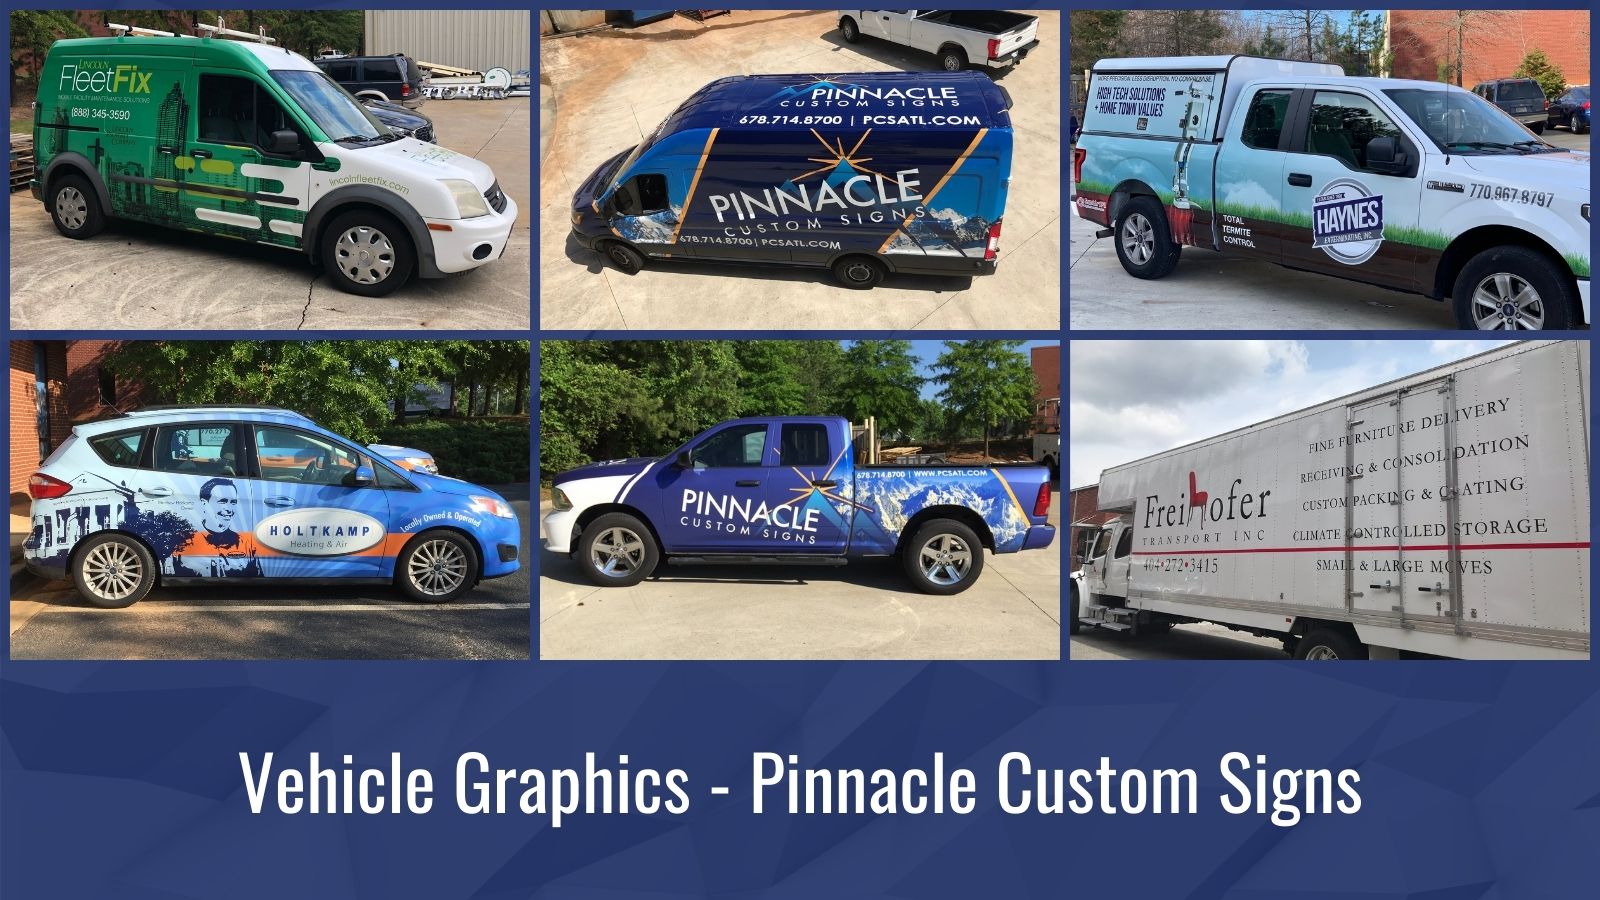 How To: Protect Vinyl Stripes & Decals with Pinnacle